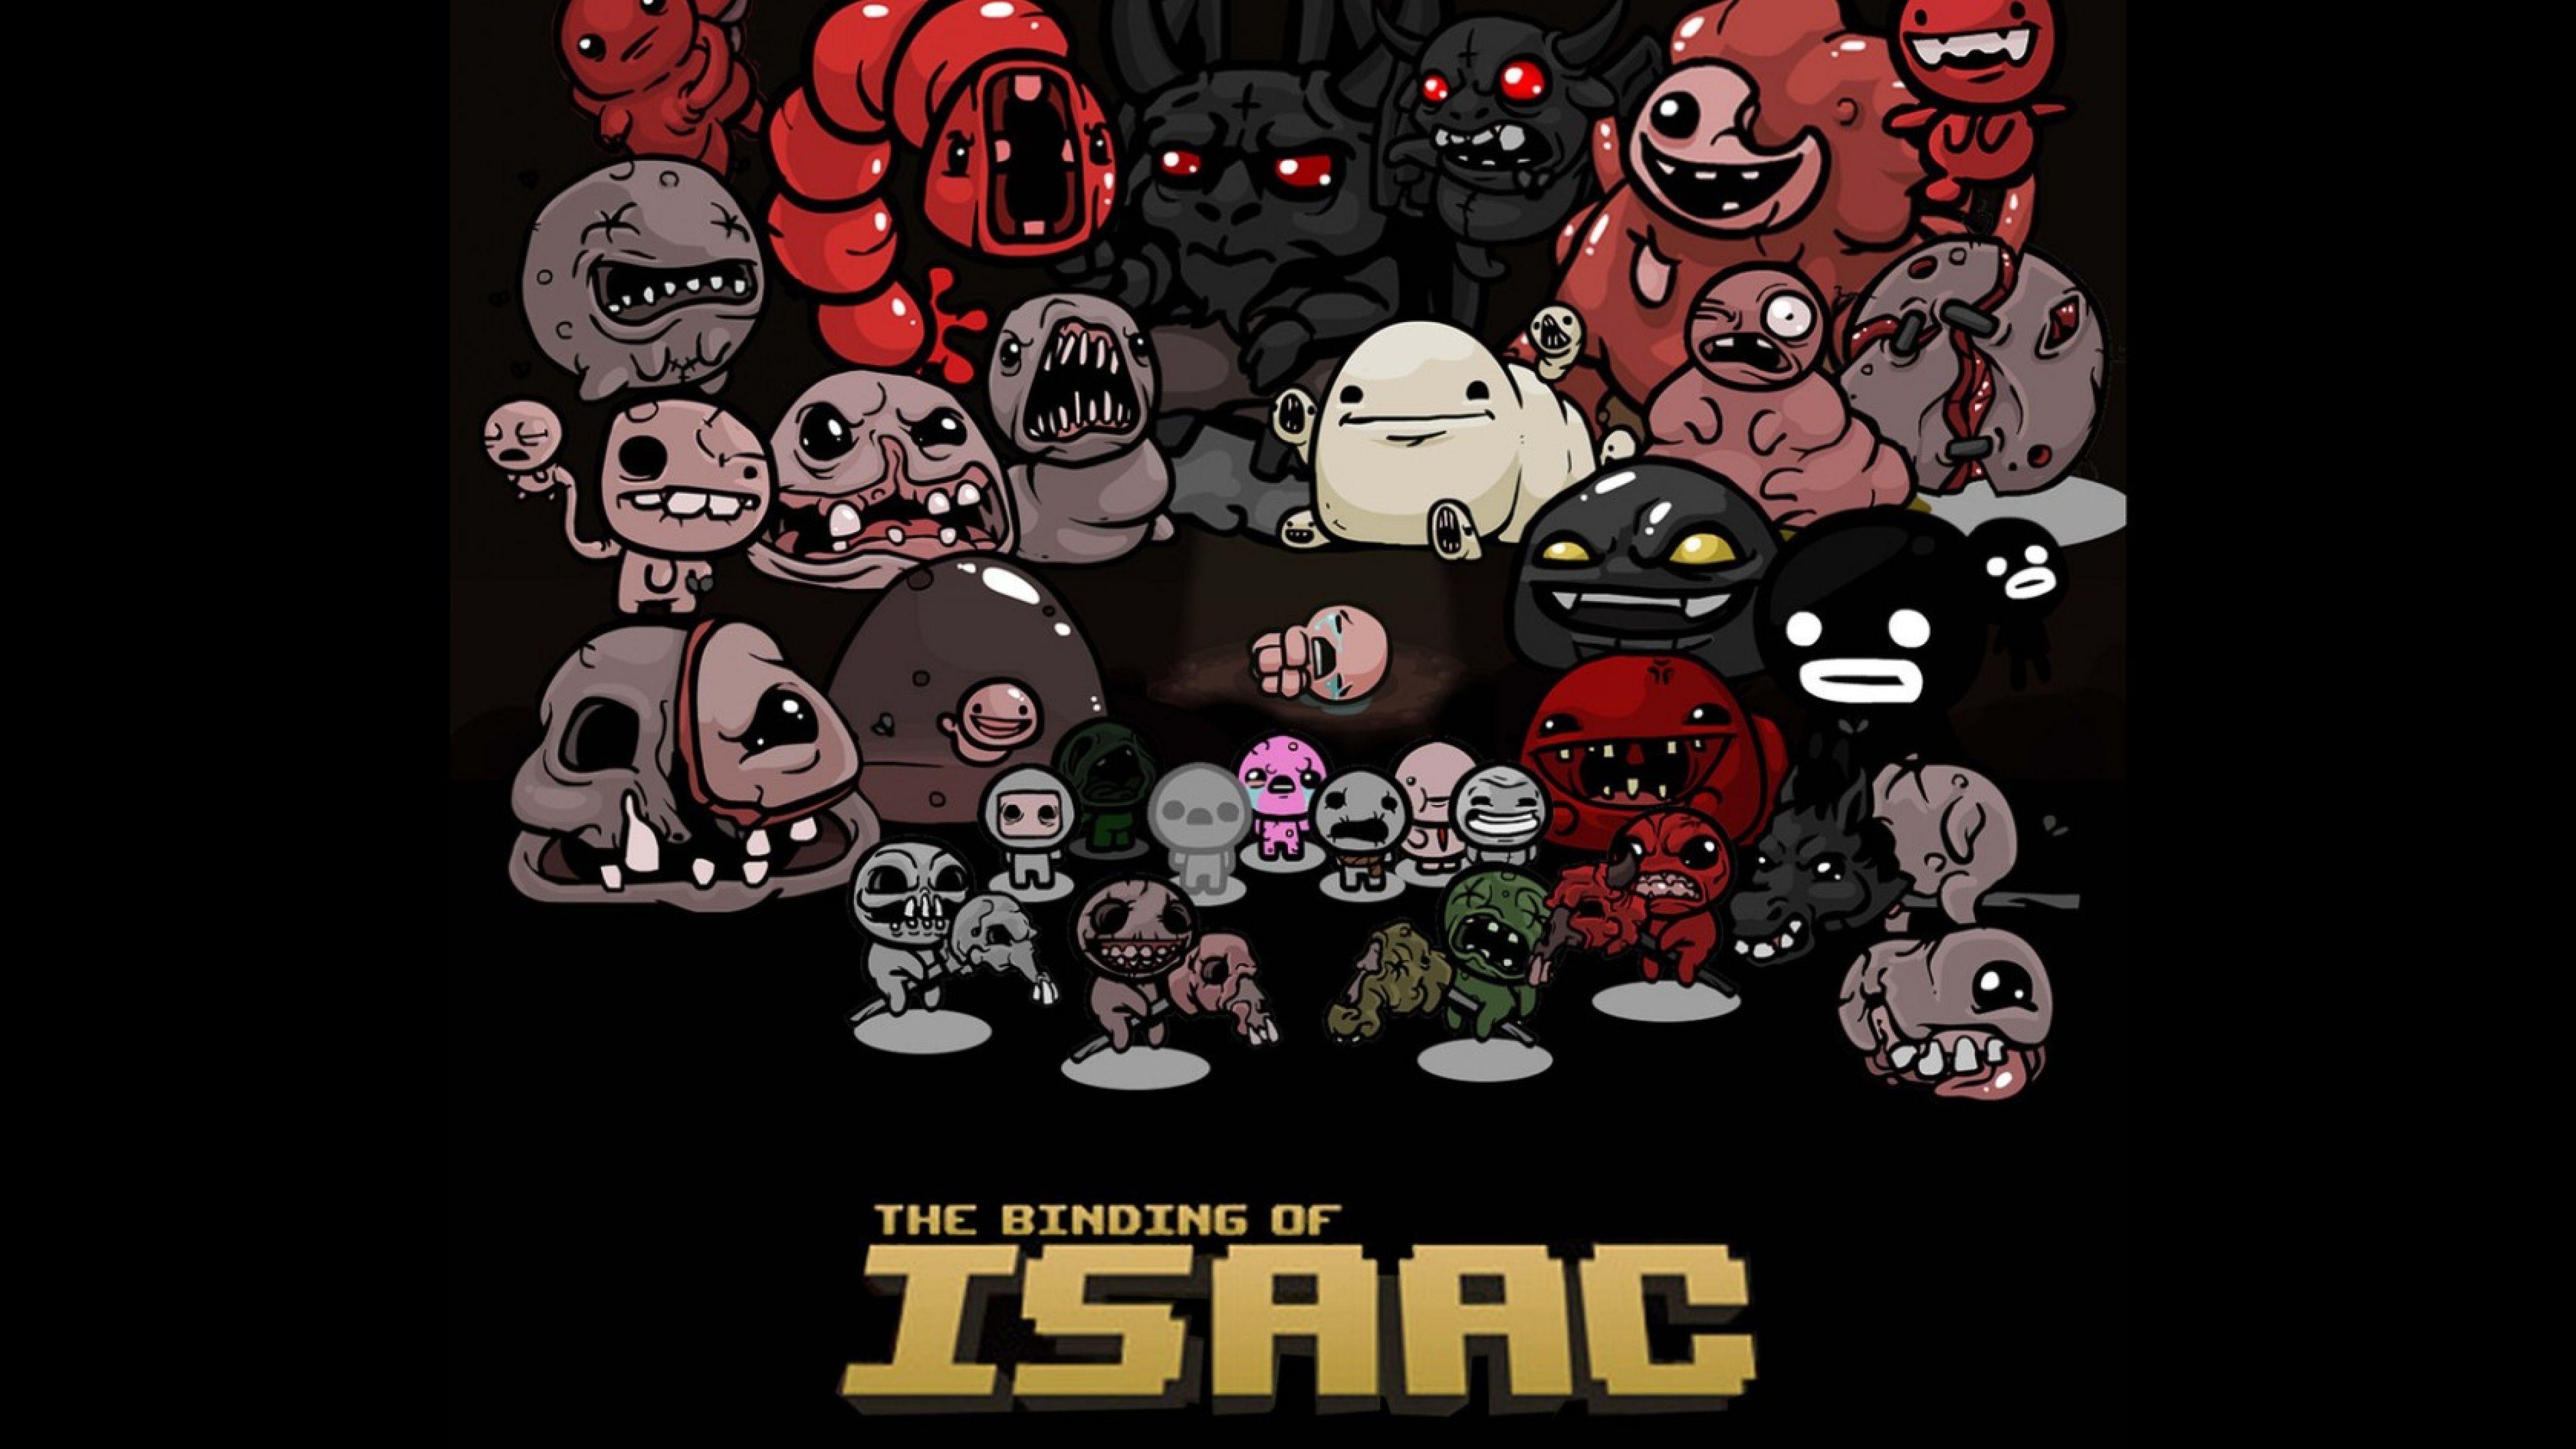 Download Wallpaper 3840x2160 The binding of isaac, Indie, Game